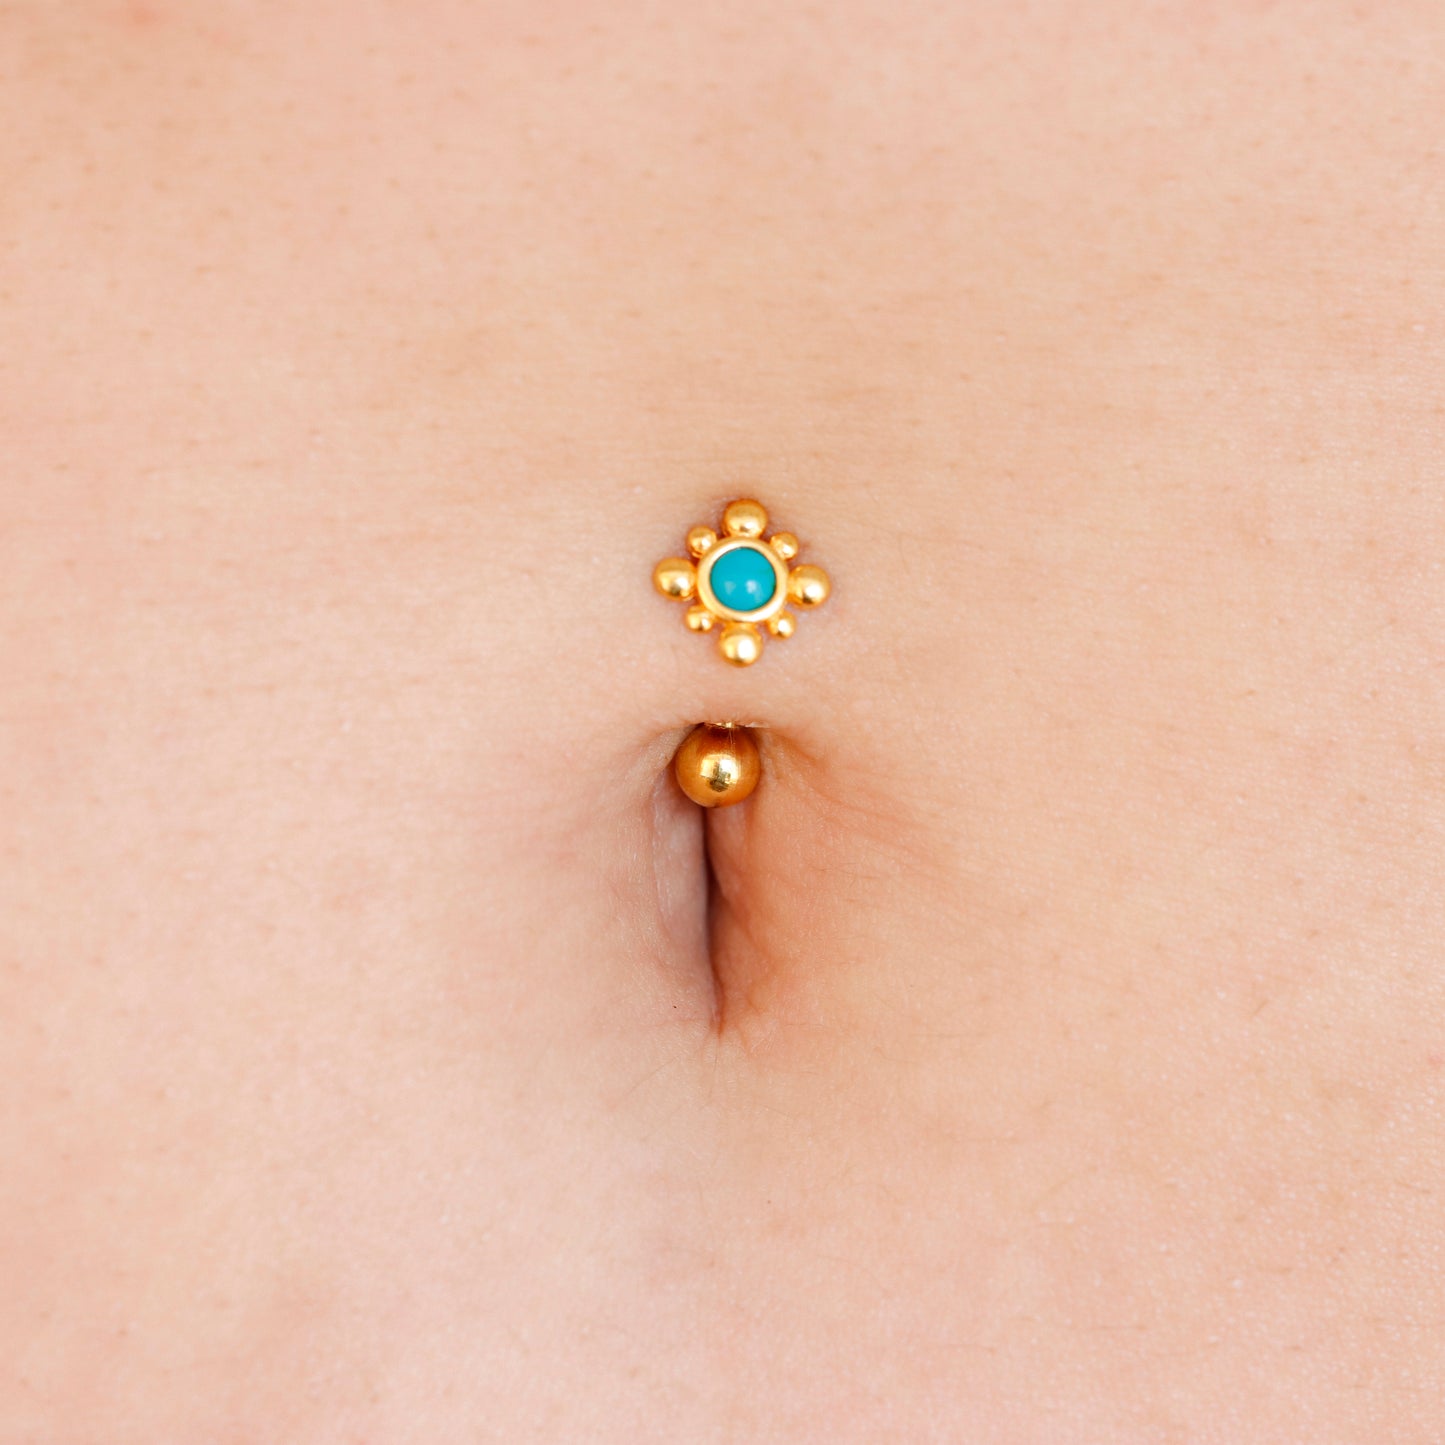 Vermeil | 925 Silver 24k Gold Coated 14G Turquoise Petite Sun Reverse Belly Ring | 6mm 1/4" 8mm 5/16" 10mm 3/8"